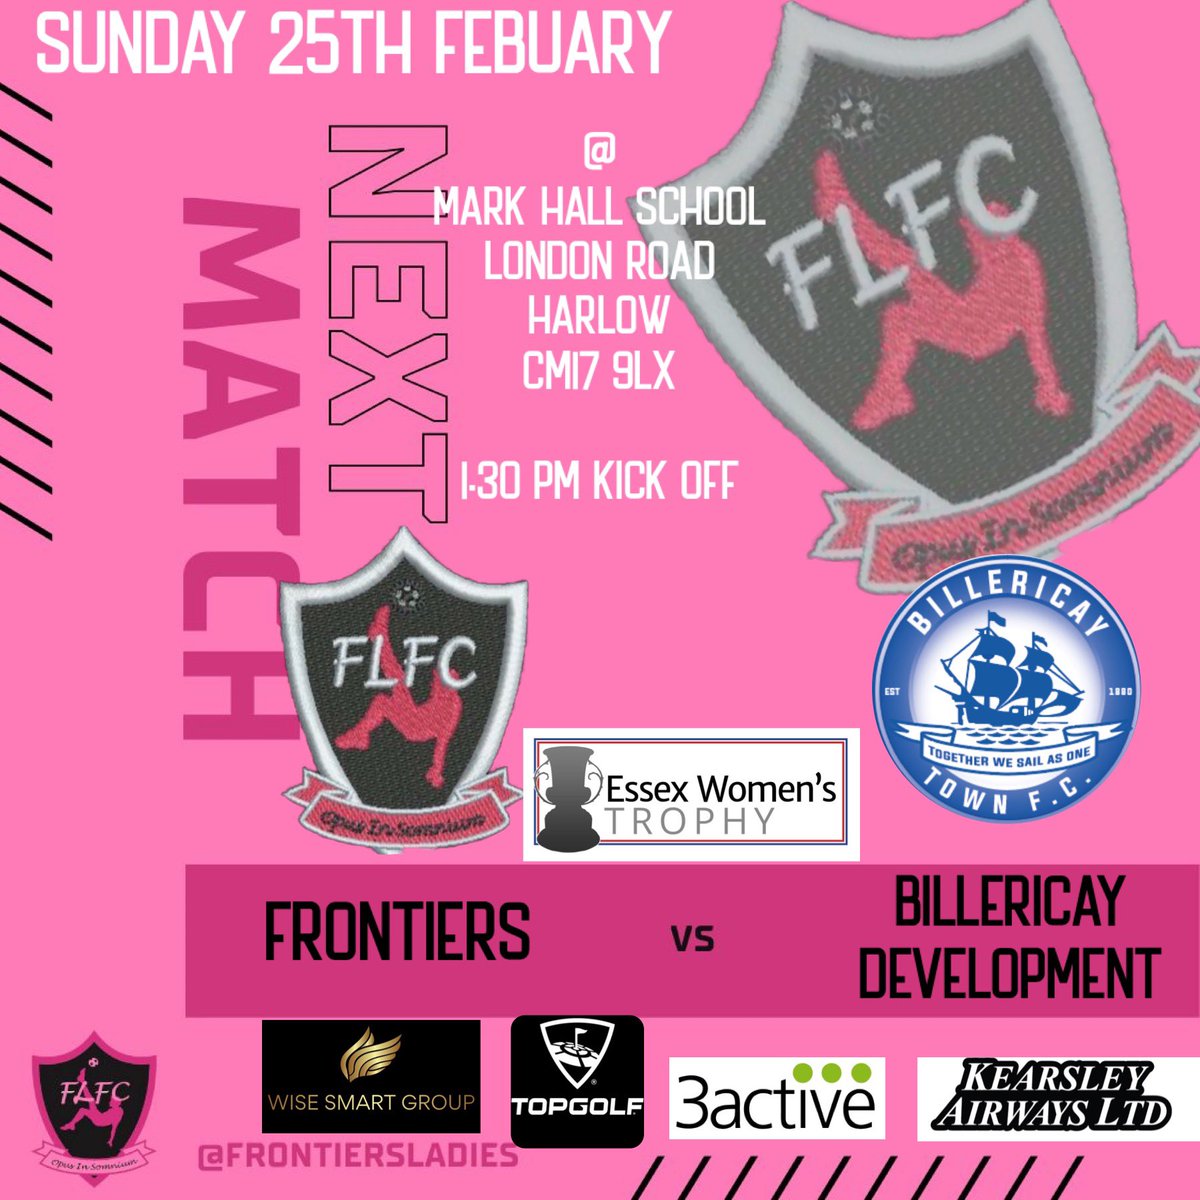 Sunday May game is ON, as we host @BTFCDevelopment in the 1/4 final of the @EssexCountyFA women’s county trophy. #letsgo 👊🏻🩷🖤